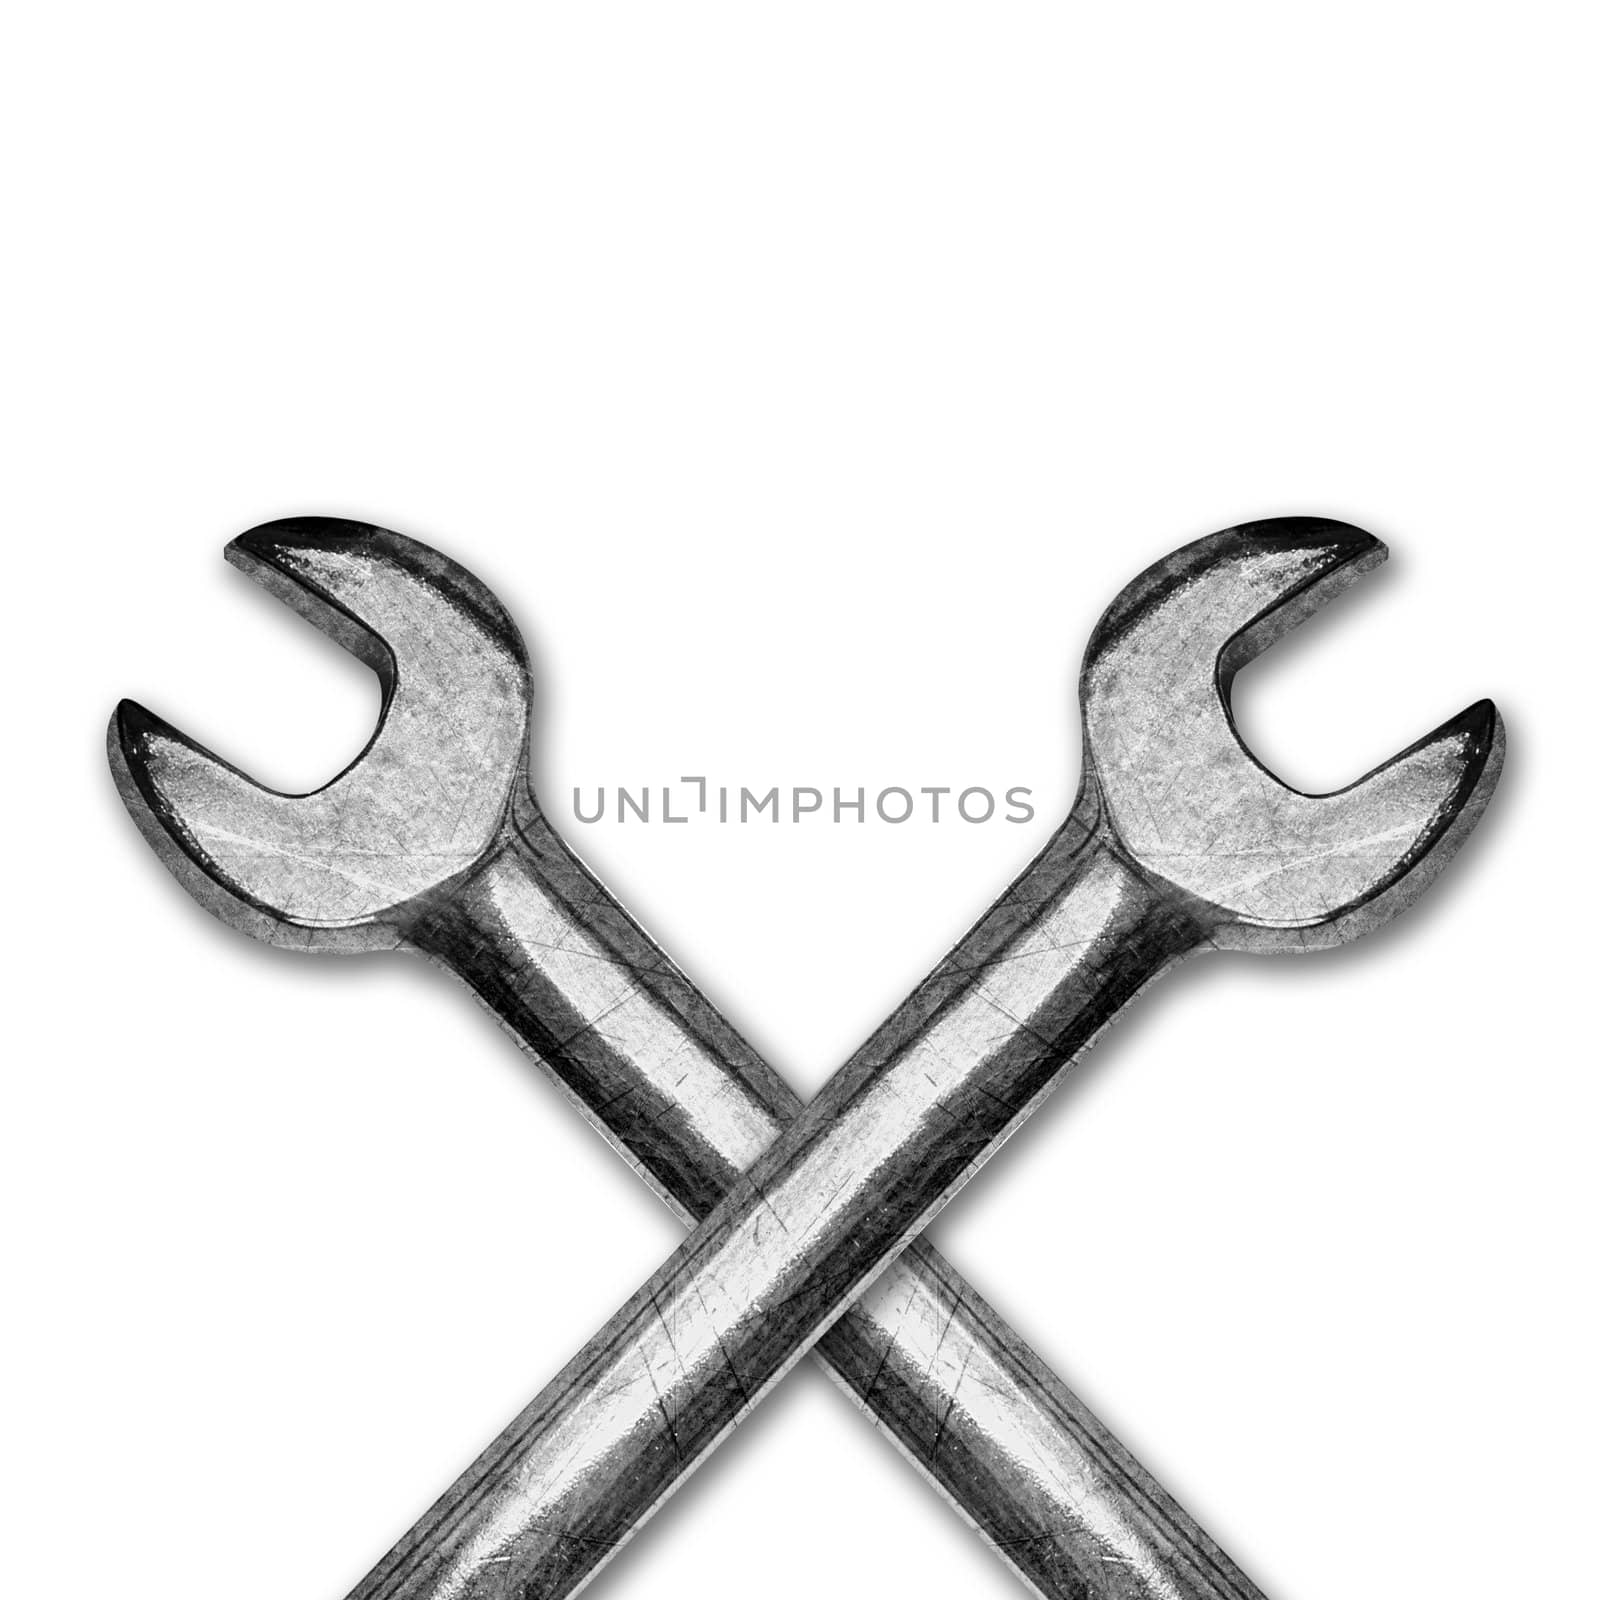 Two spanners or wrenchs on white background.